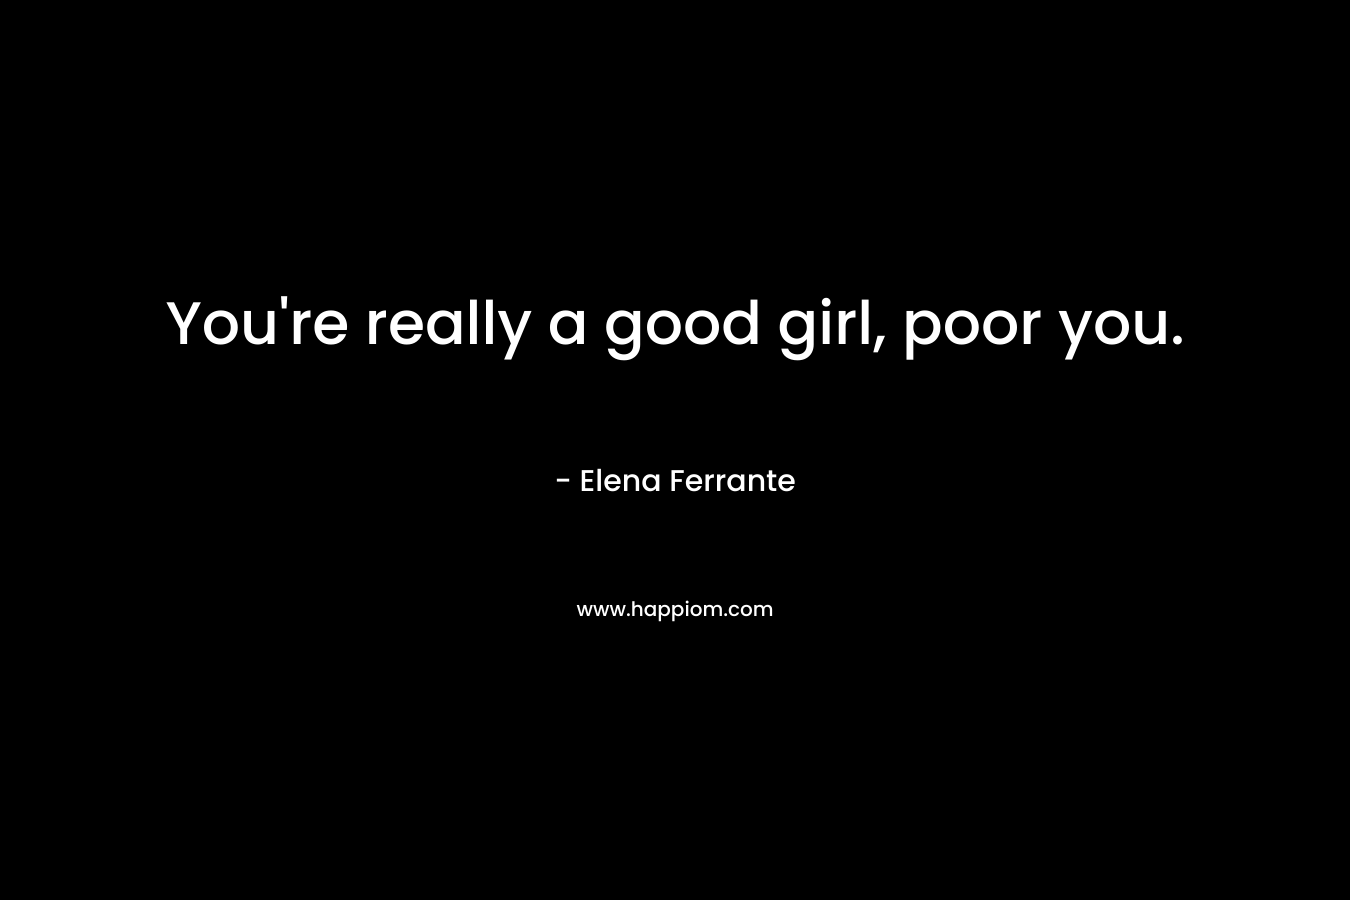 You're really a good girl, poor you.